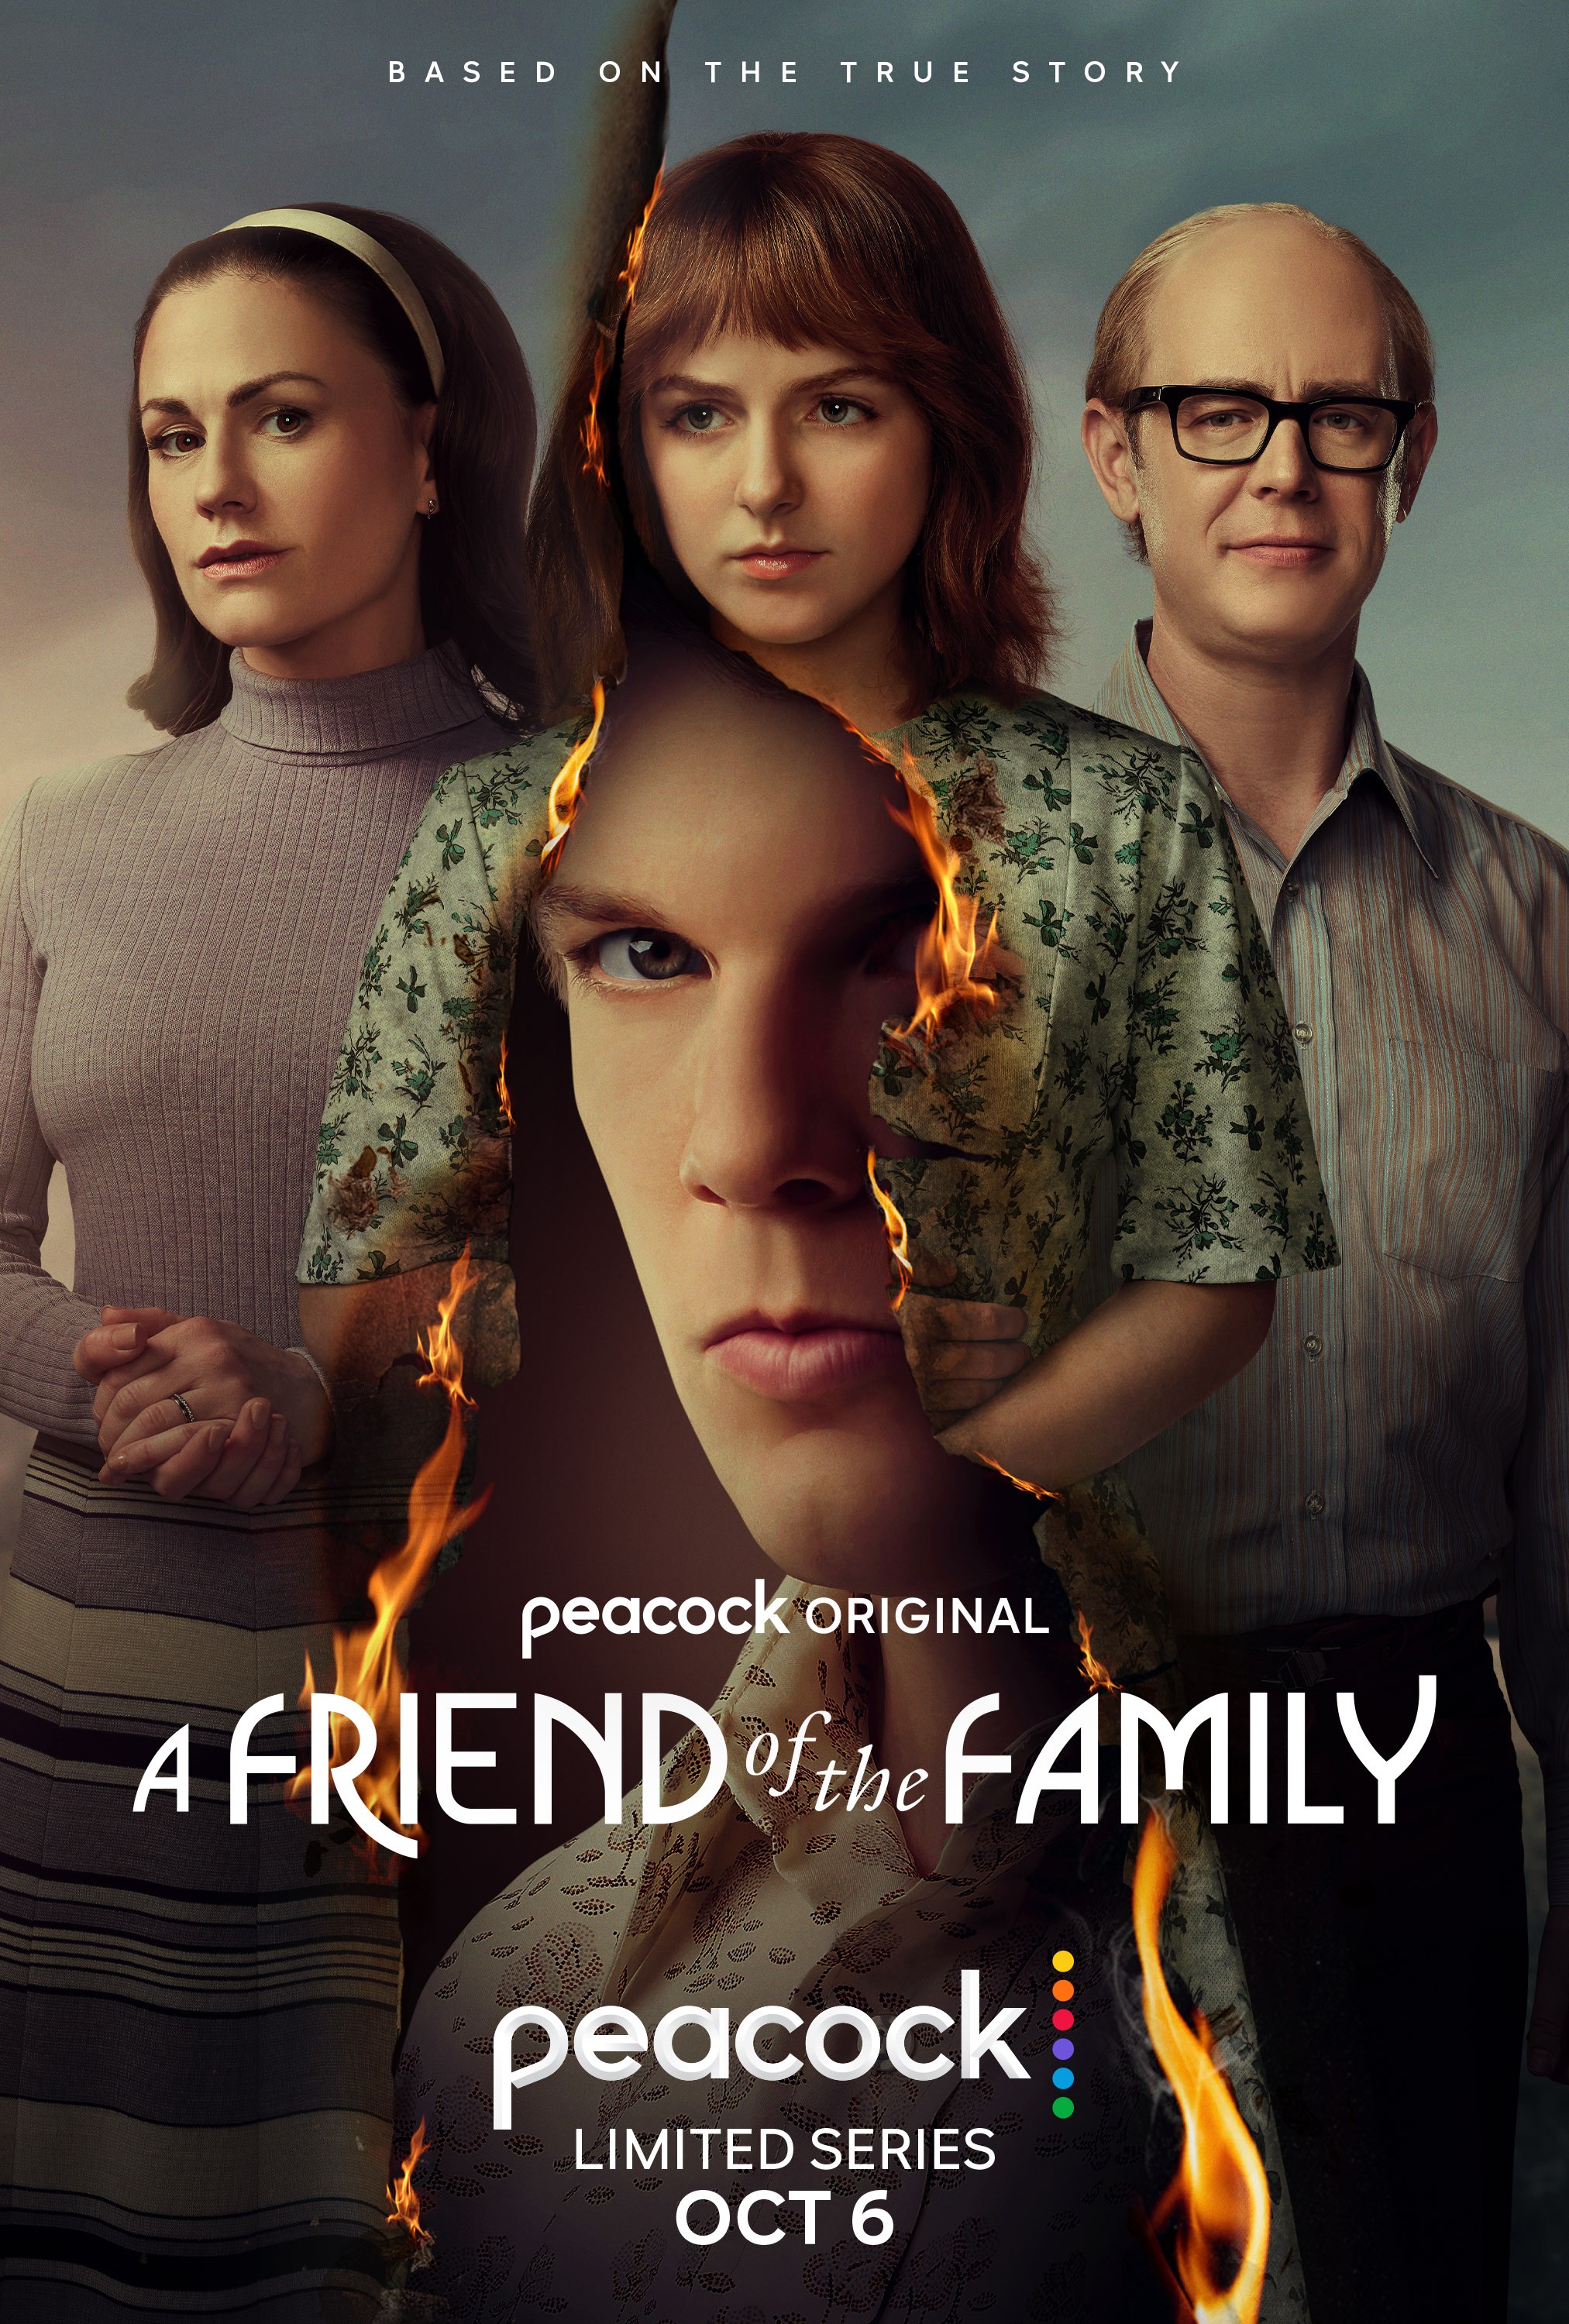 a friend of the family movie review